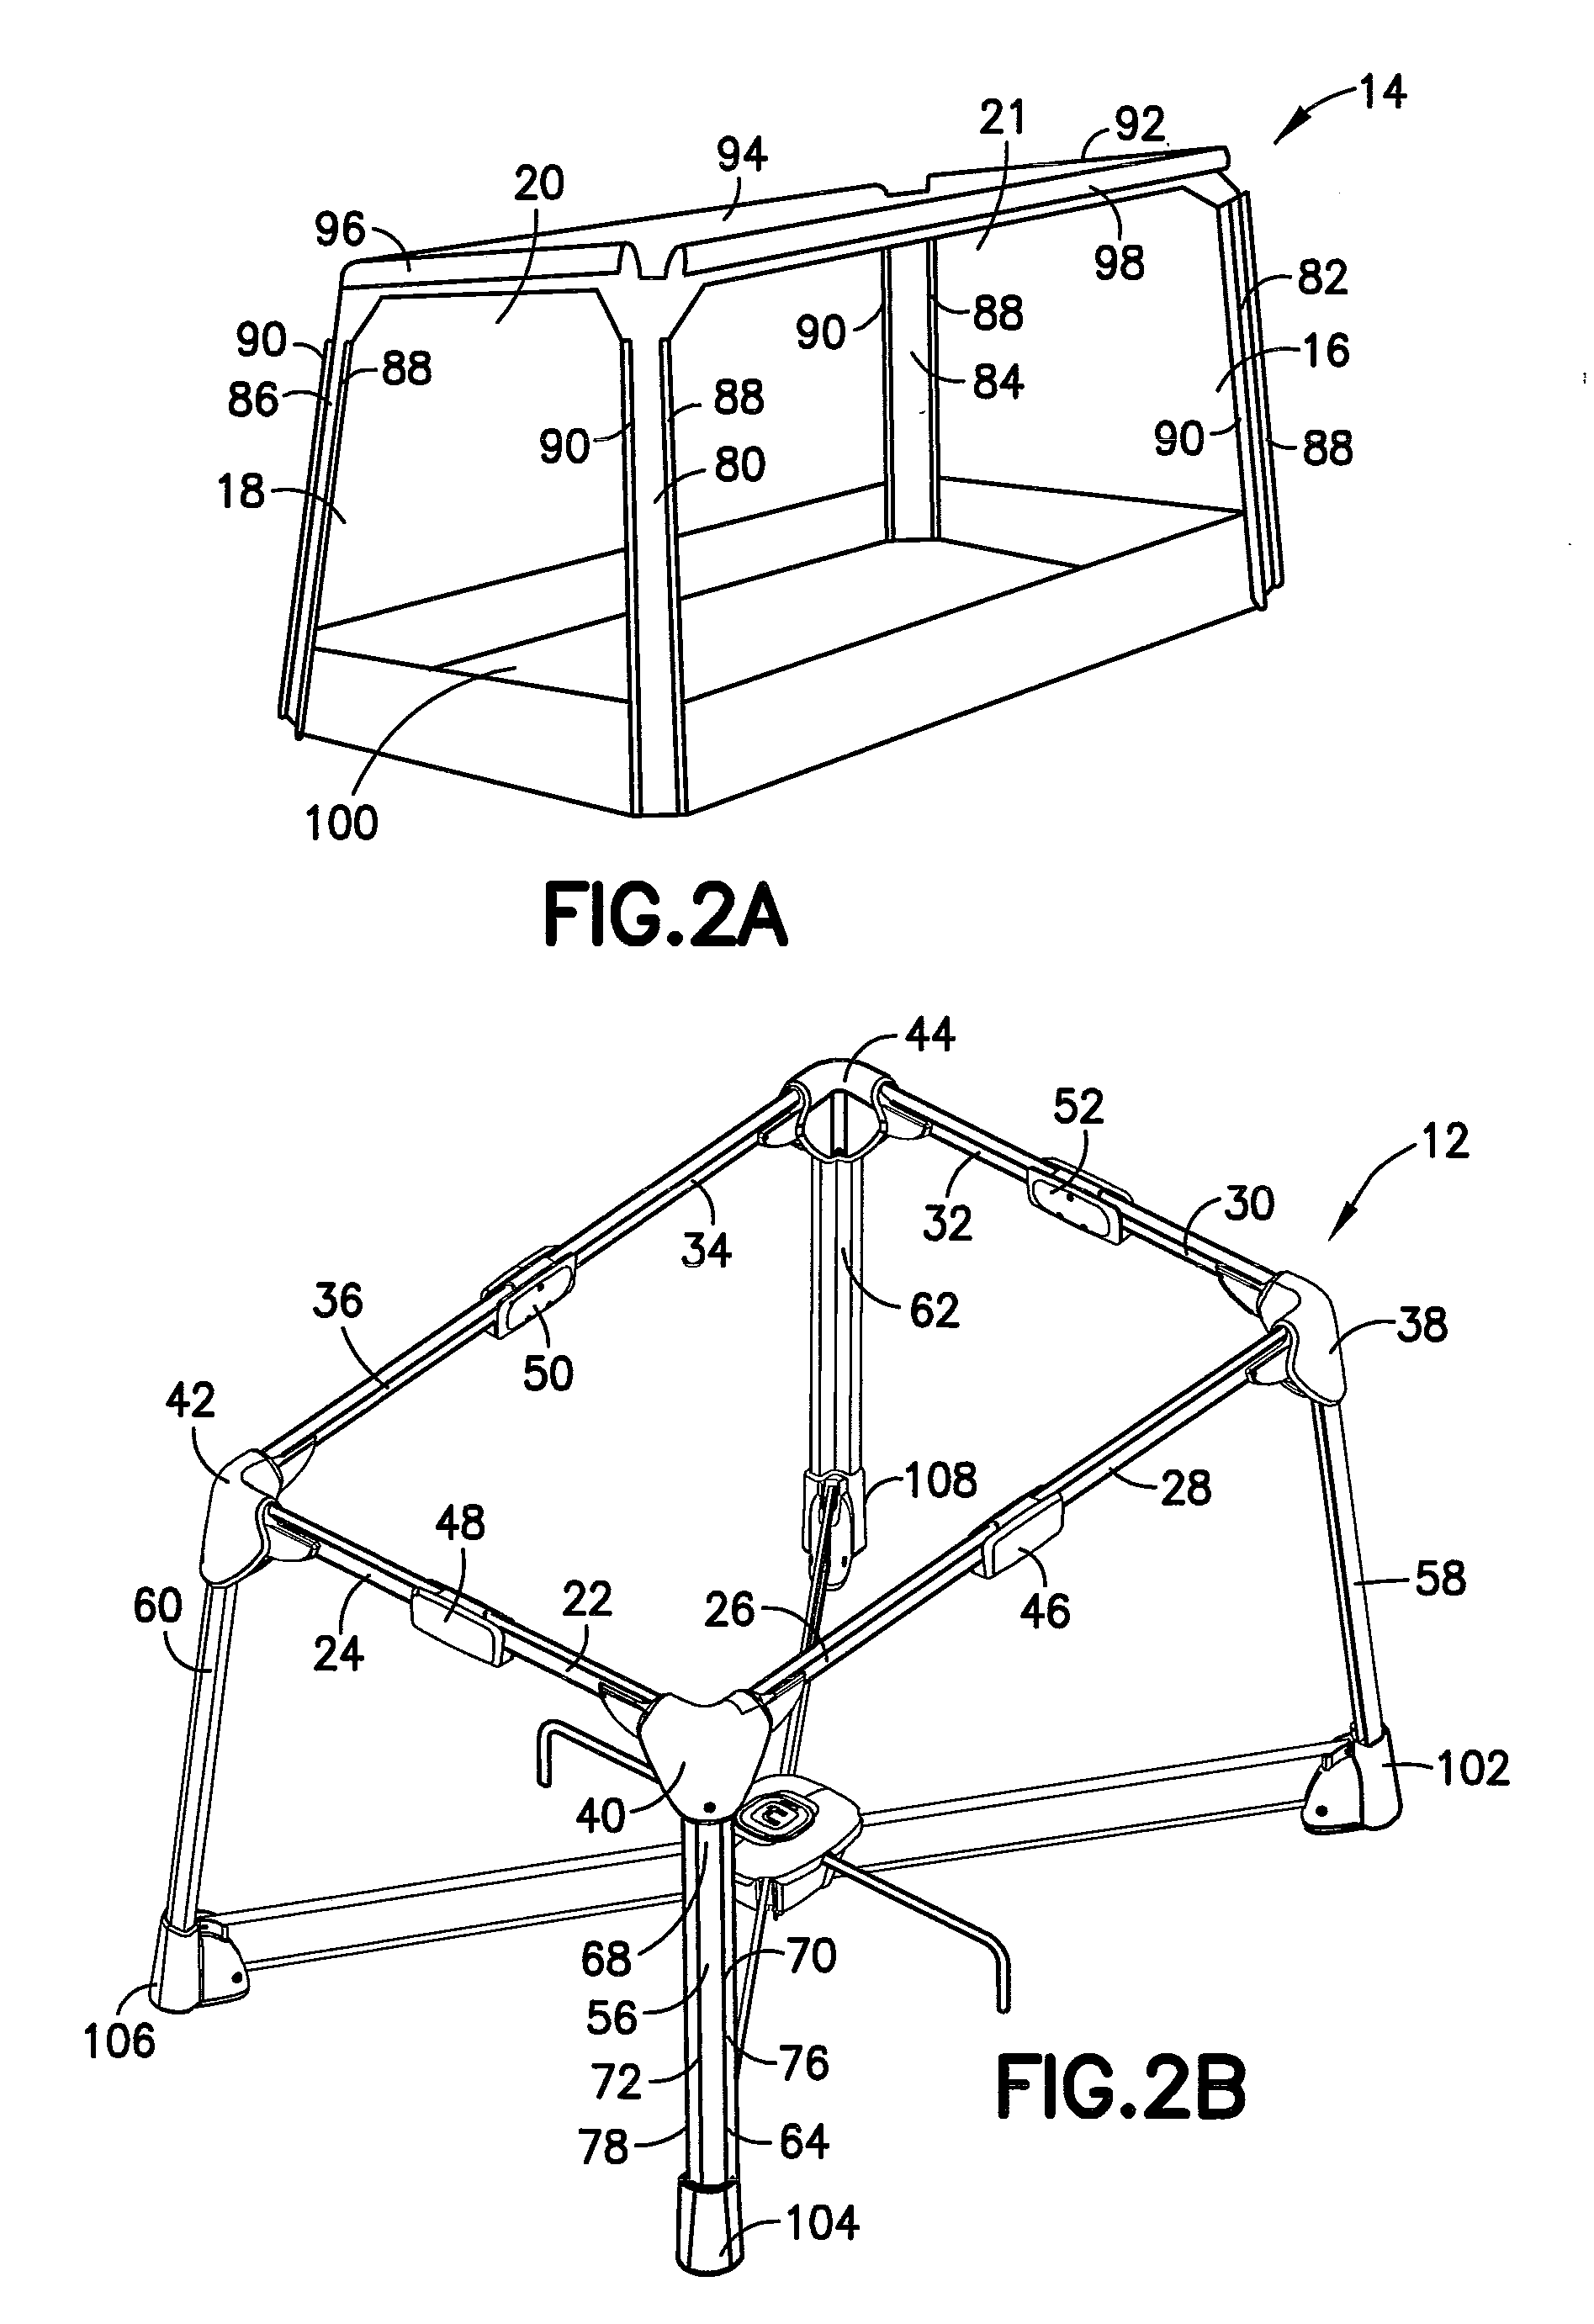 Foldable Play Yard Apparatus Including a Clamp and a Method of Attaching a Flexible Sheet to the Clamp